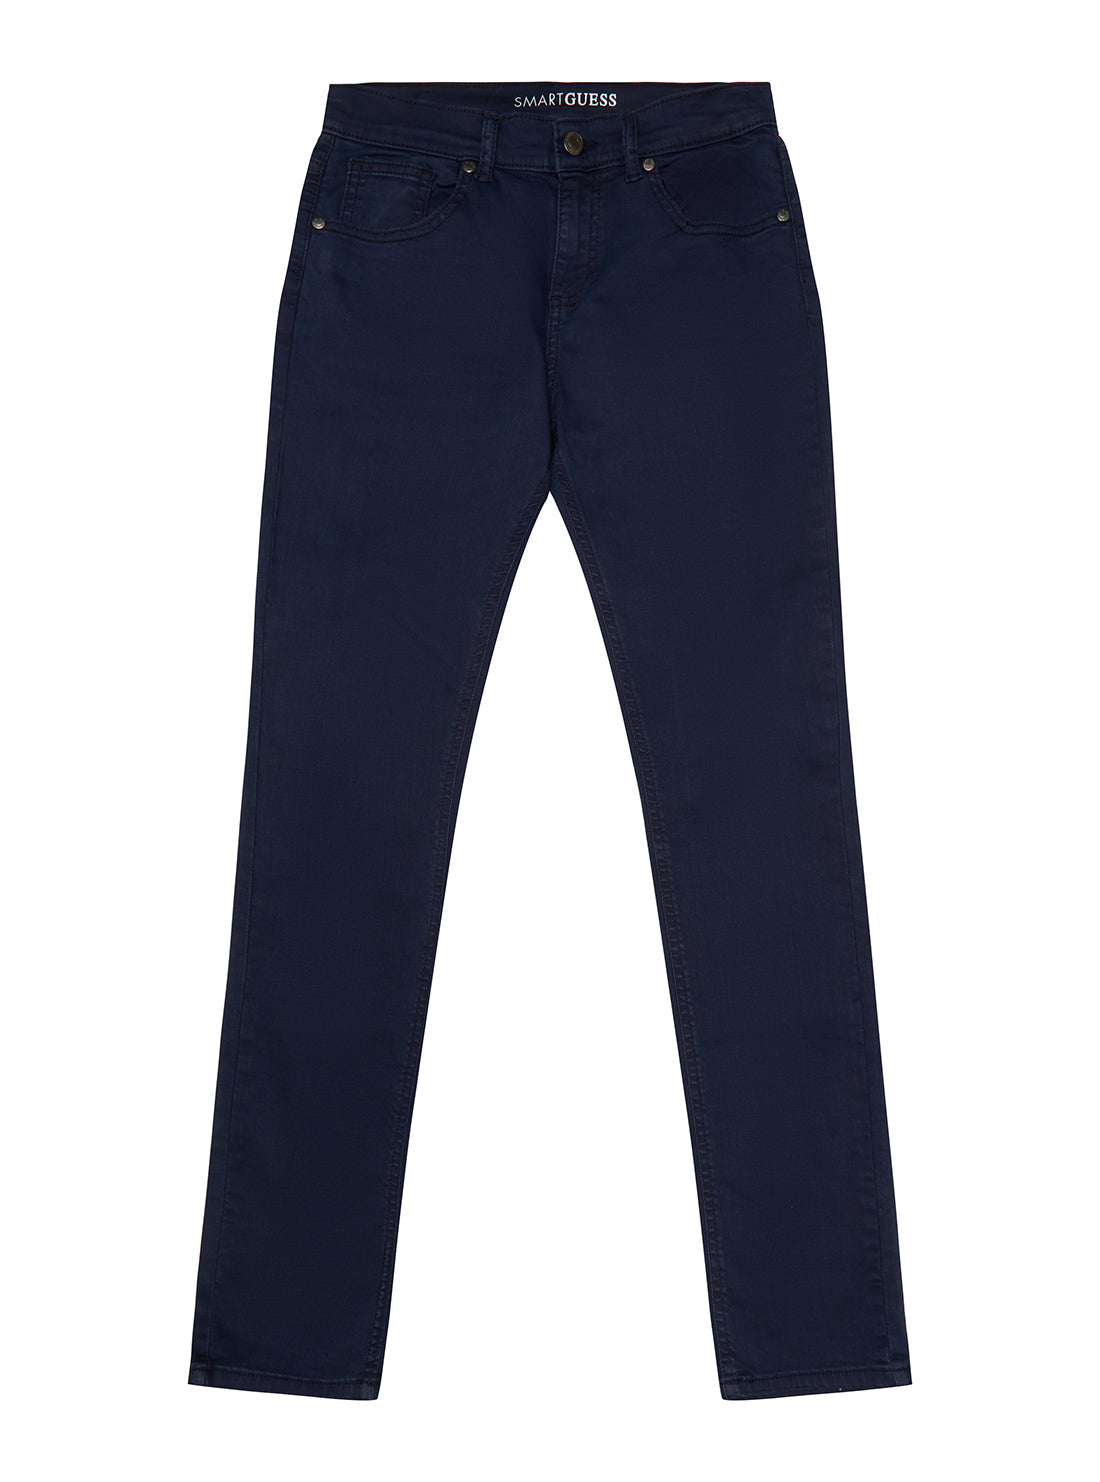 GUESS Boys Blue St Bull Denim Jeans (7-16) Front View